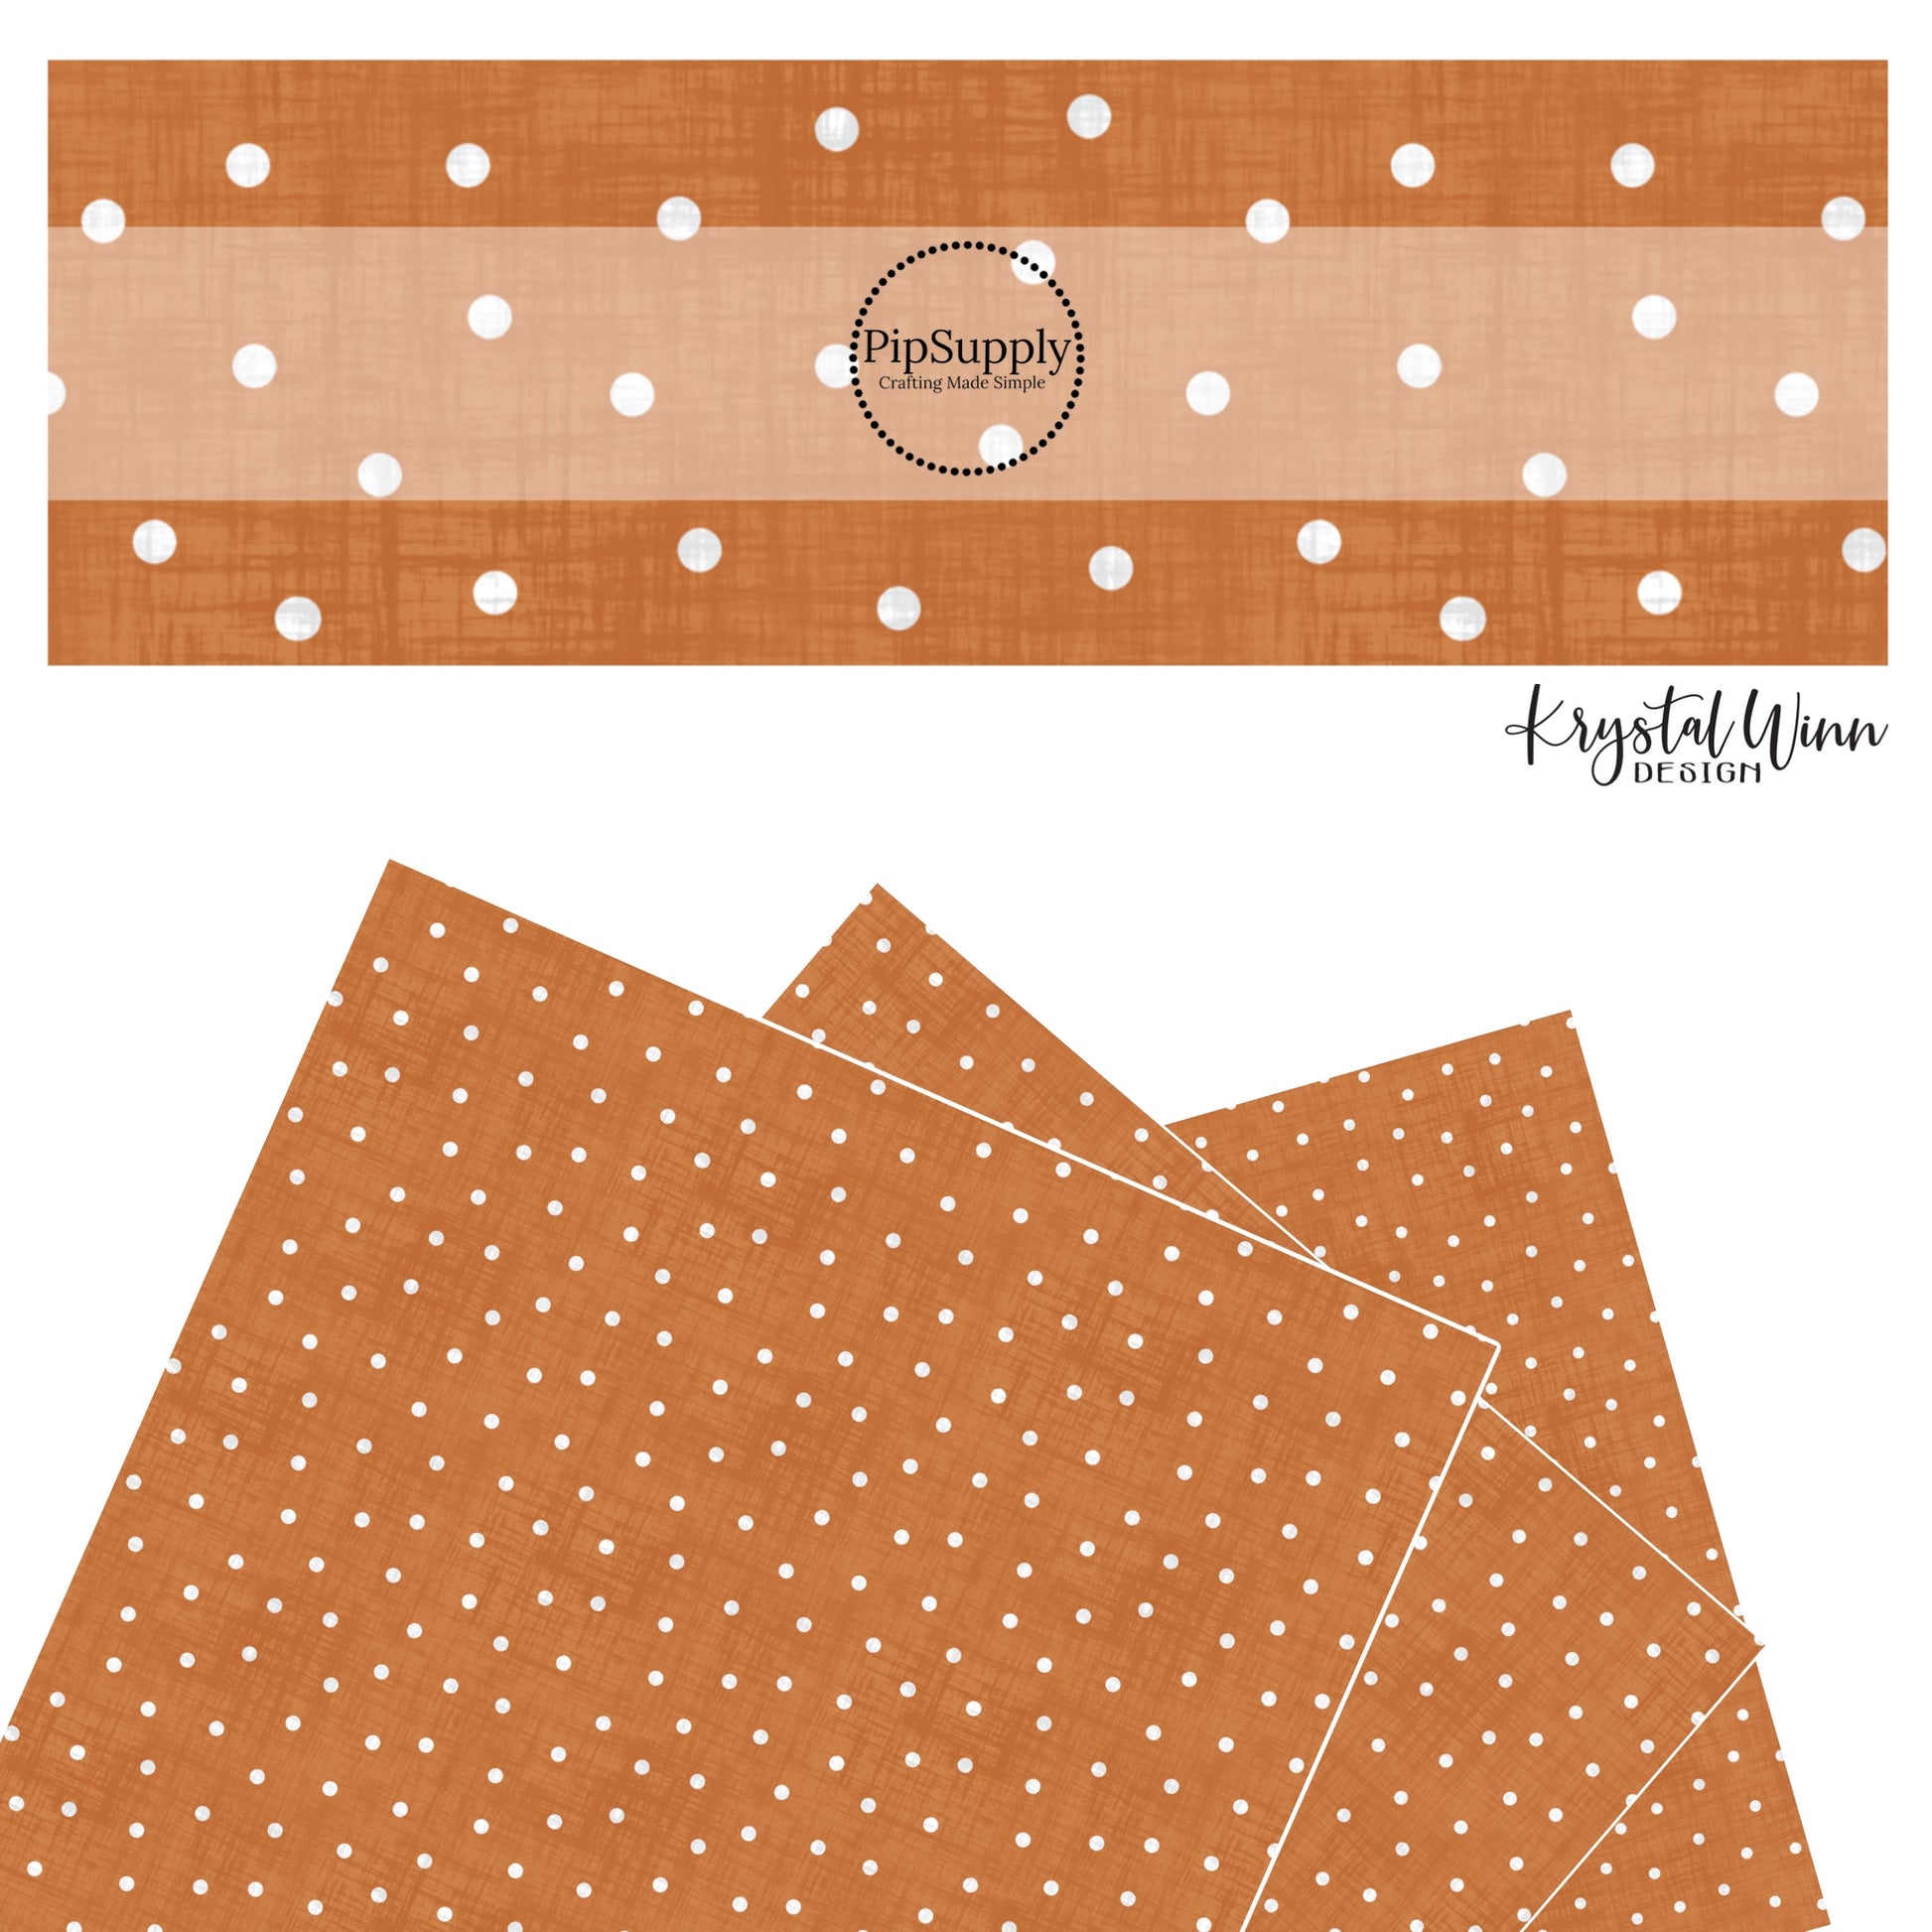 Distressed white dots on orange faux leather sheets